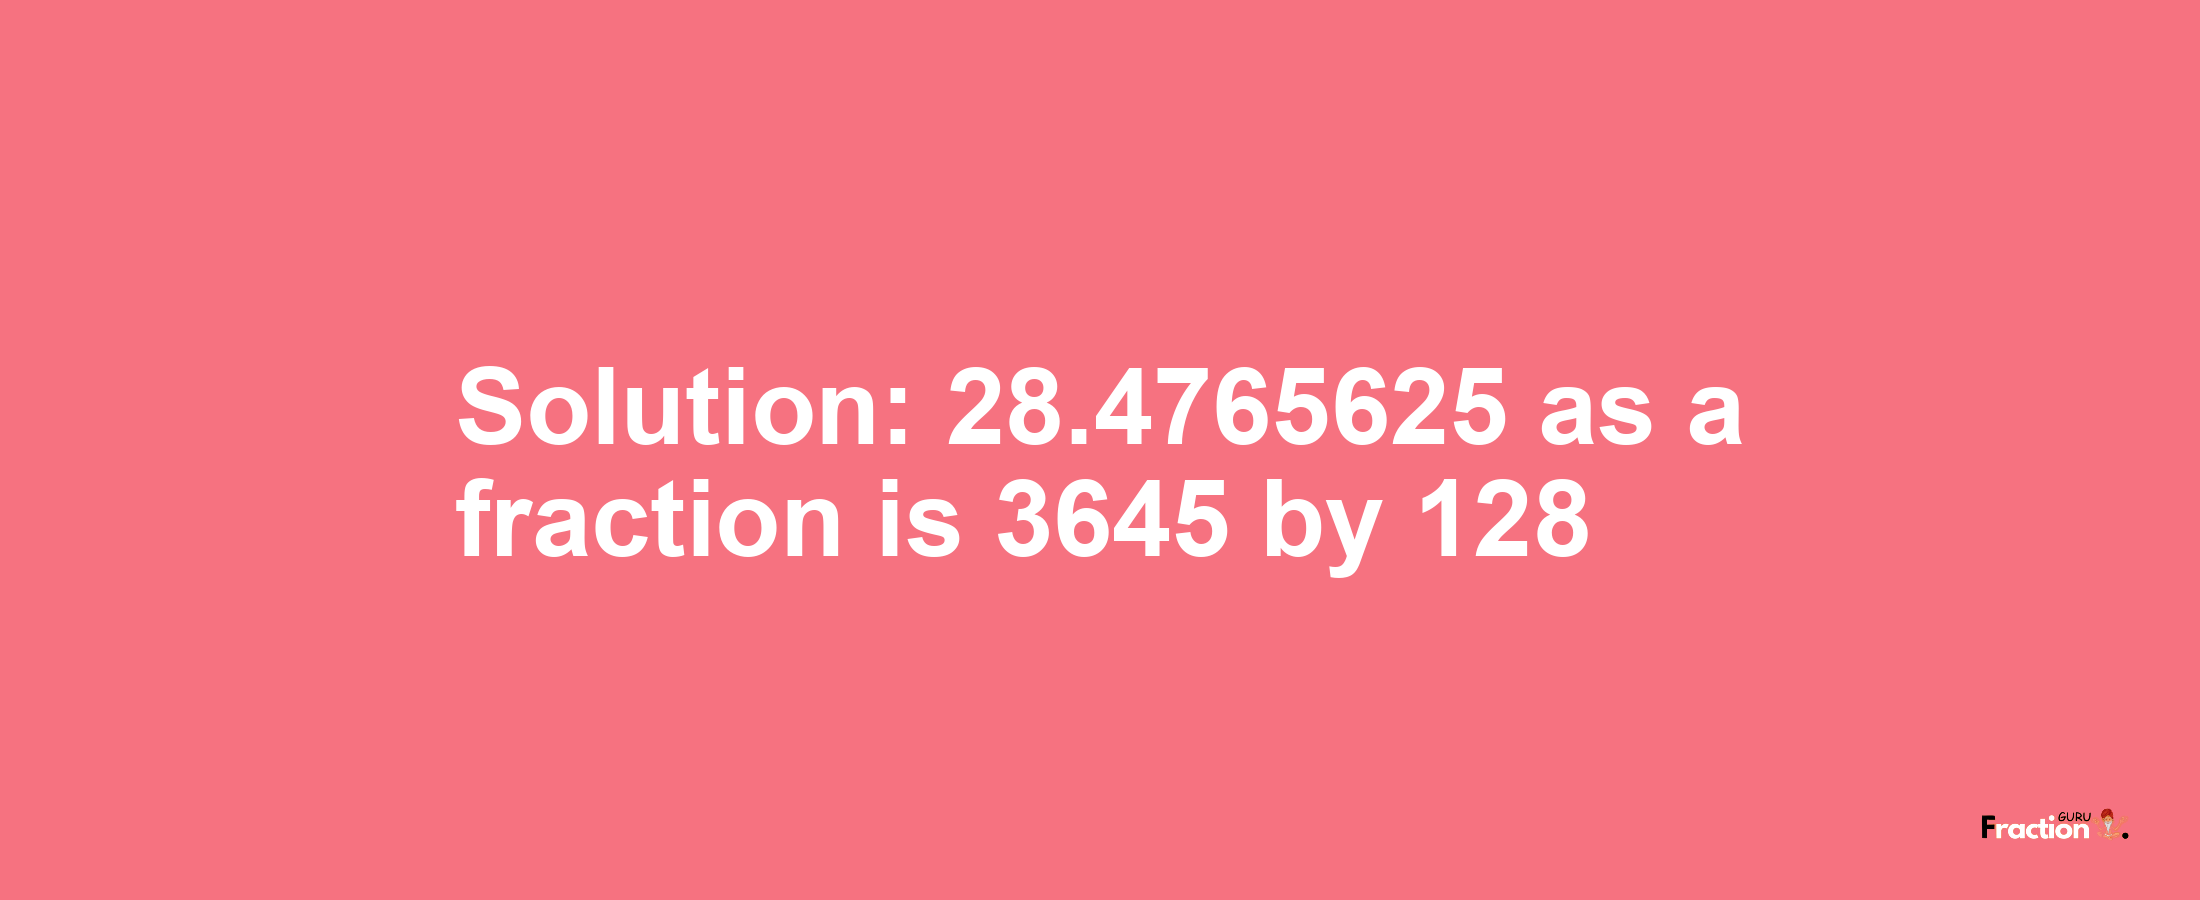 Solution:28.4765625 as a fraction is 3645/128